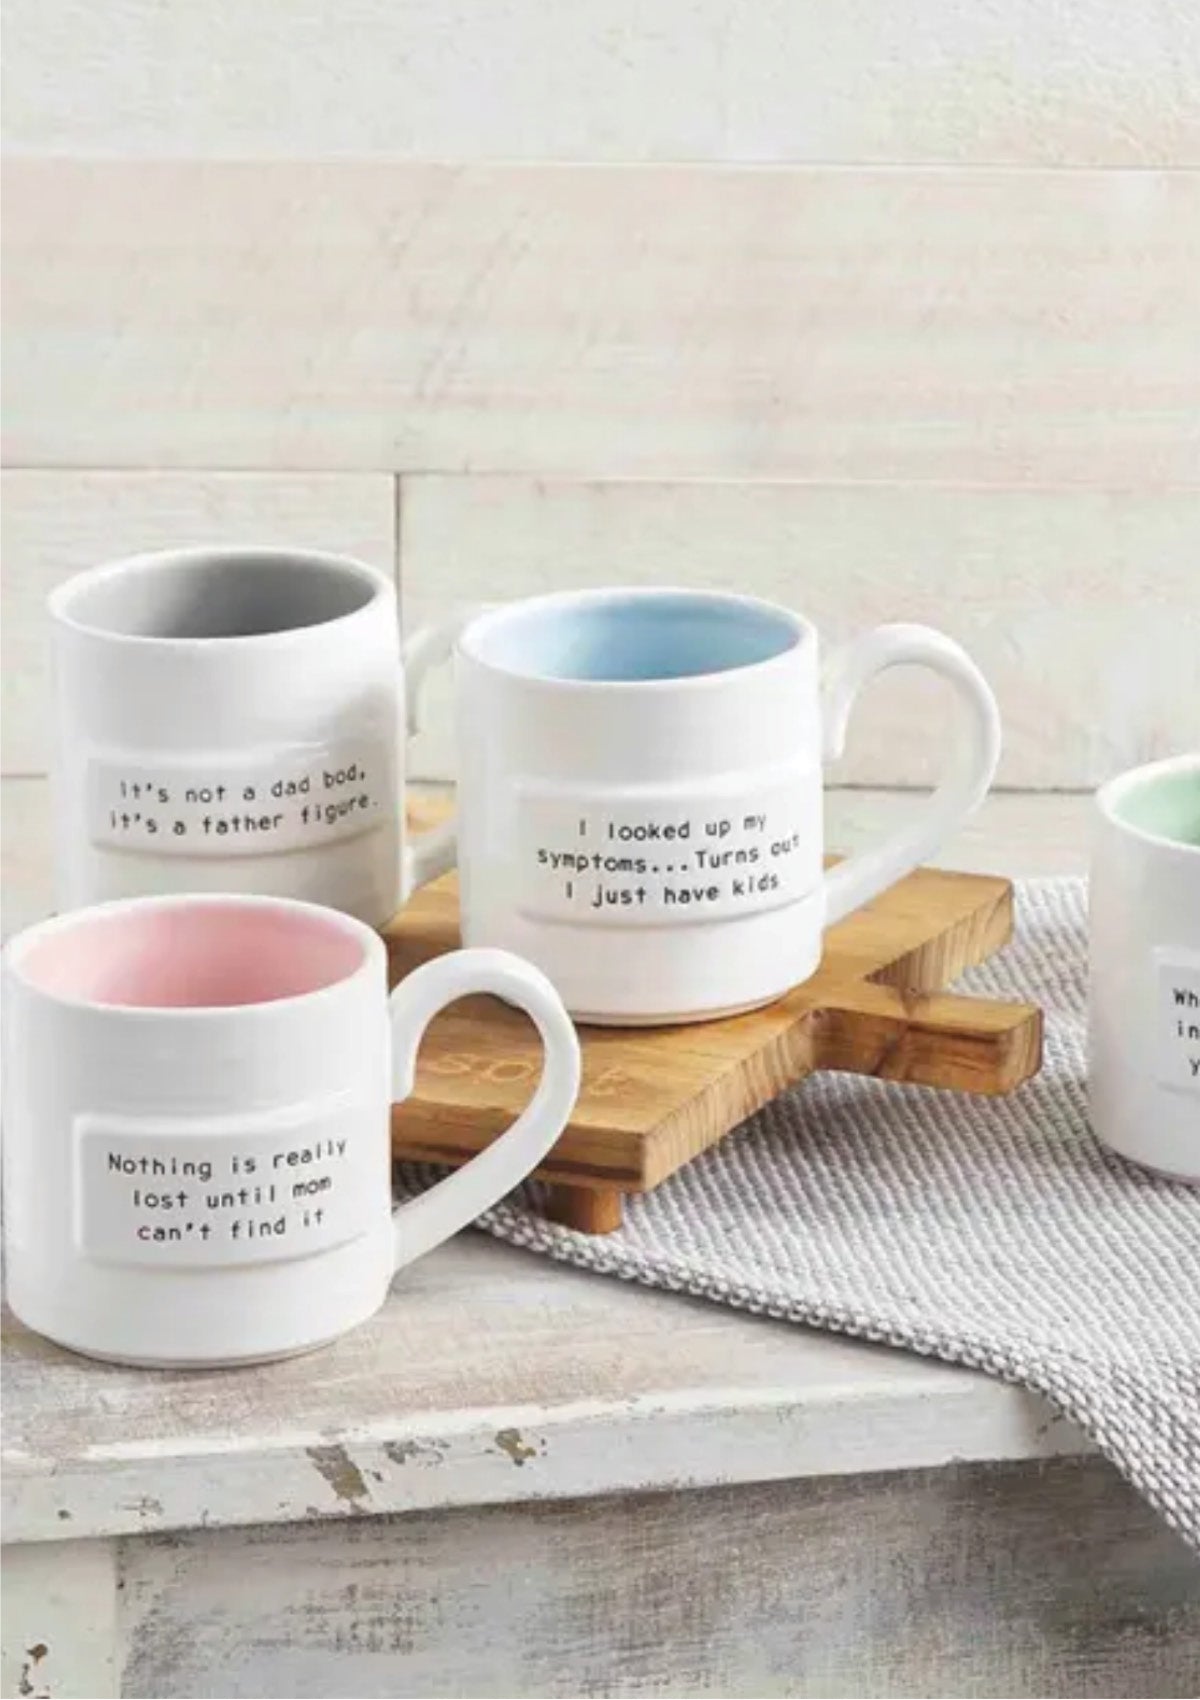 'Nothing is really lost until mom can't find it' Coffee Mug